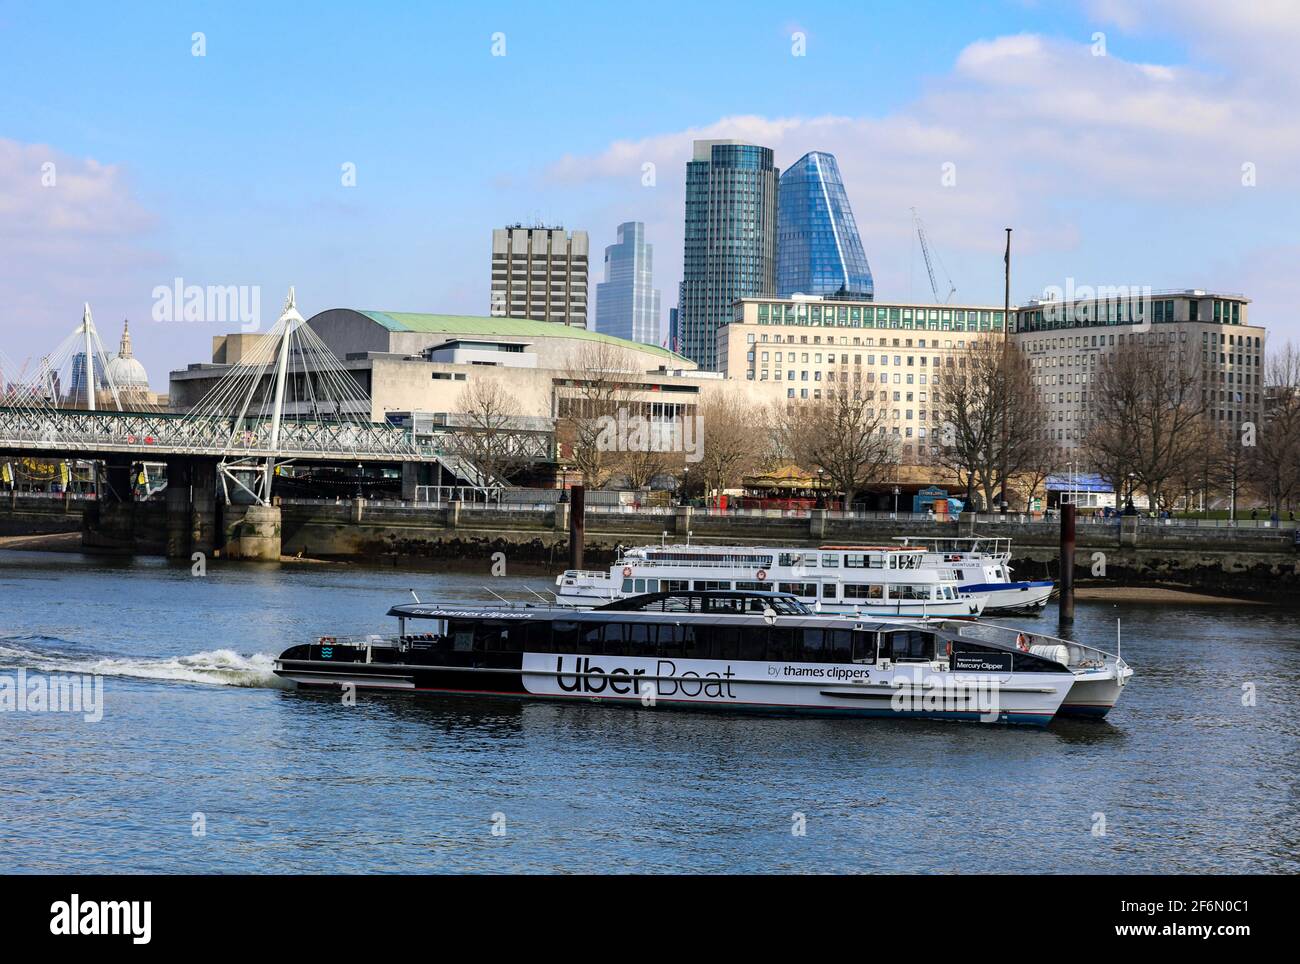 London, UK. 23rd Mar, 2021. The Uber Boat by Thames Clippers seen along the River Thames in London. Credit: Brett Cove/SOPA Images/ZUMA Wire/Alamy Live News Stock Photo